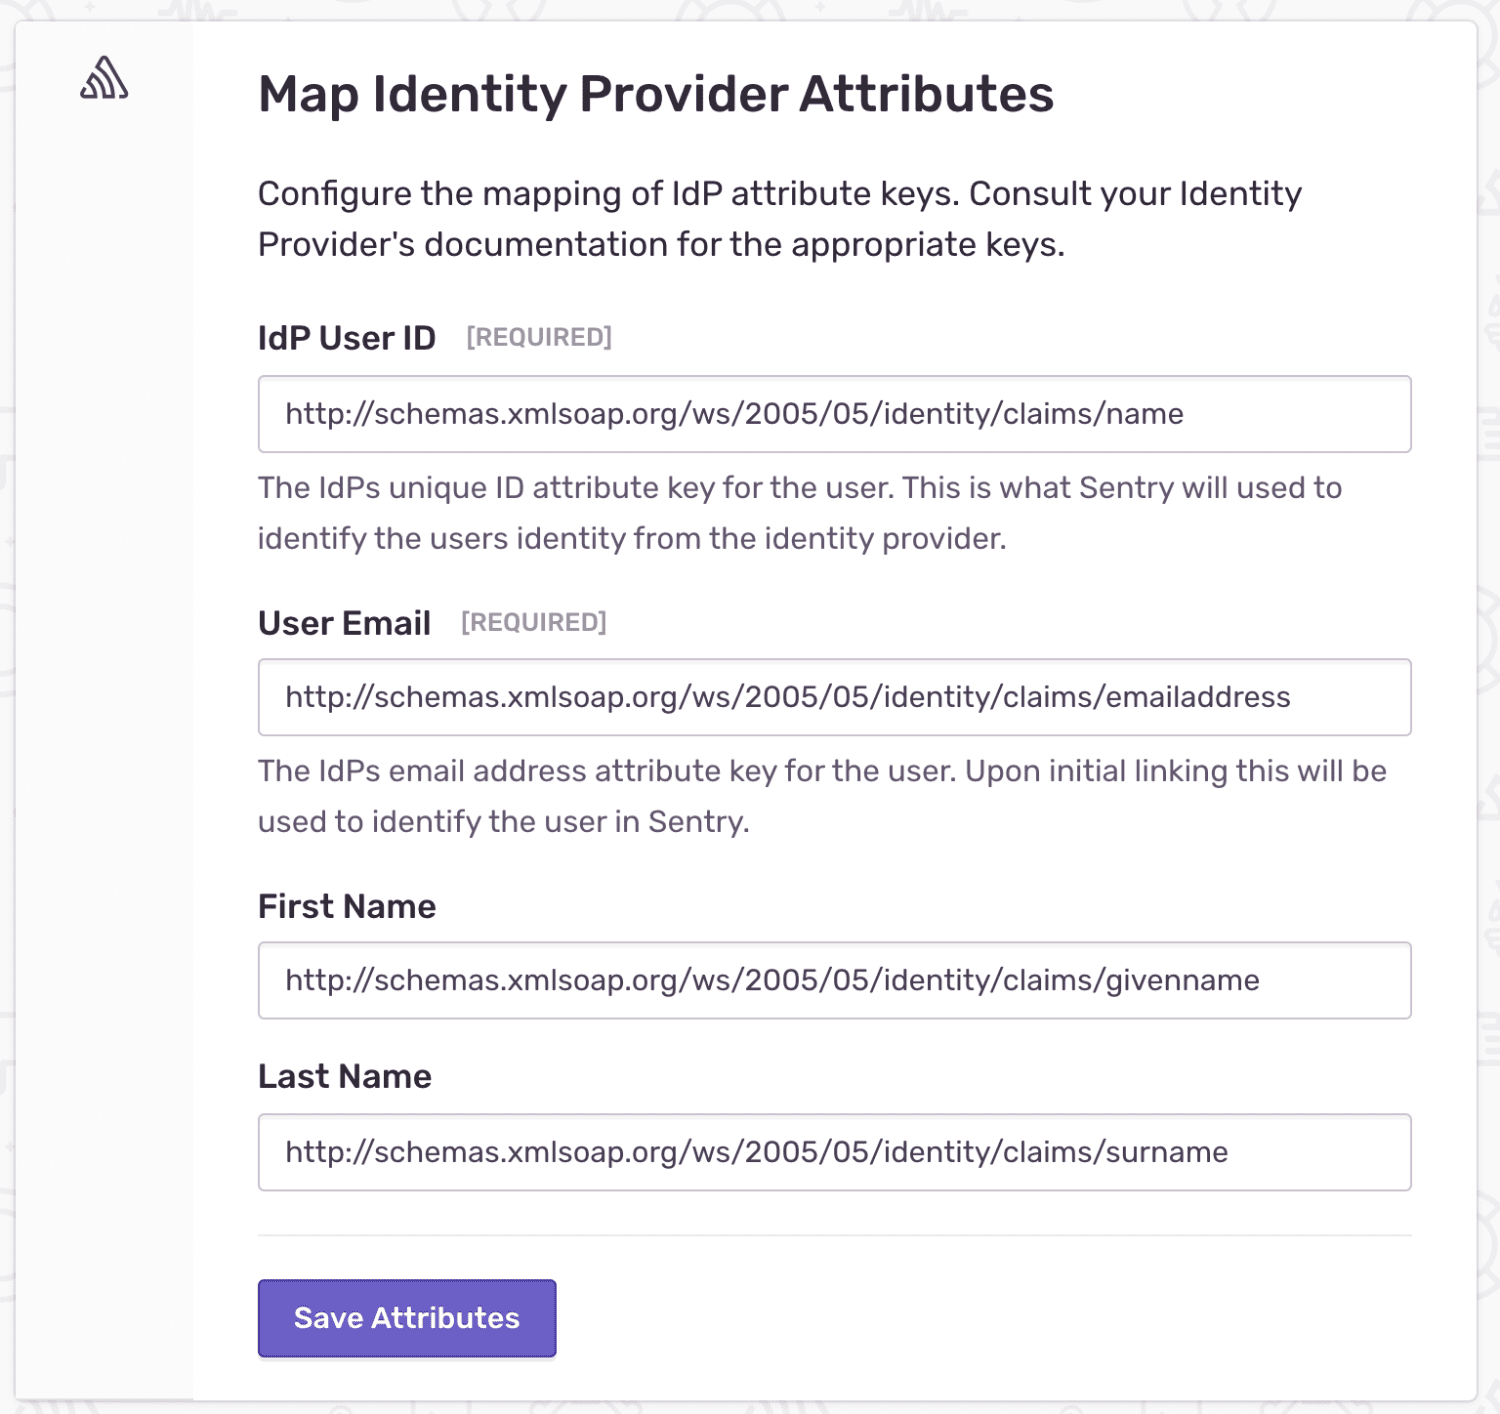 Map Identity with provider attributes